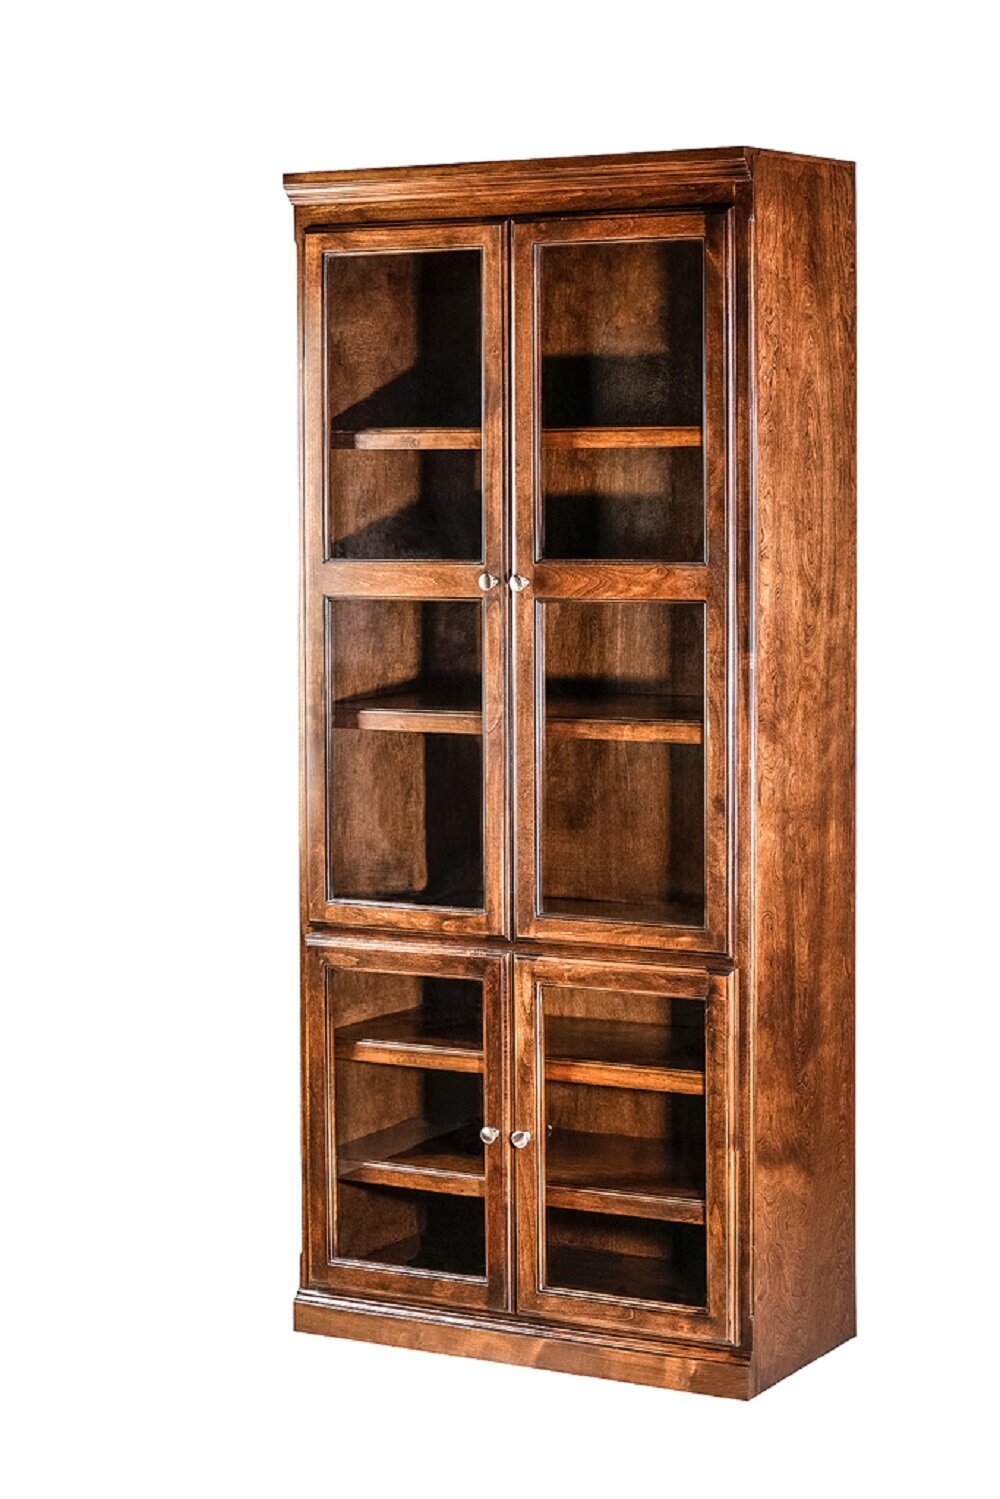 Bookcase With Glass Doors Visualhunt, Unfinished Wood Bookcase With Glass Doors And Drawers